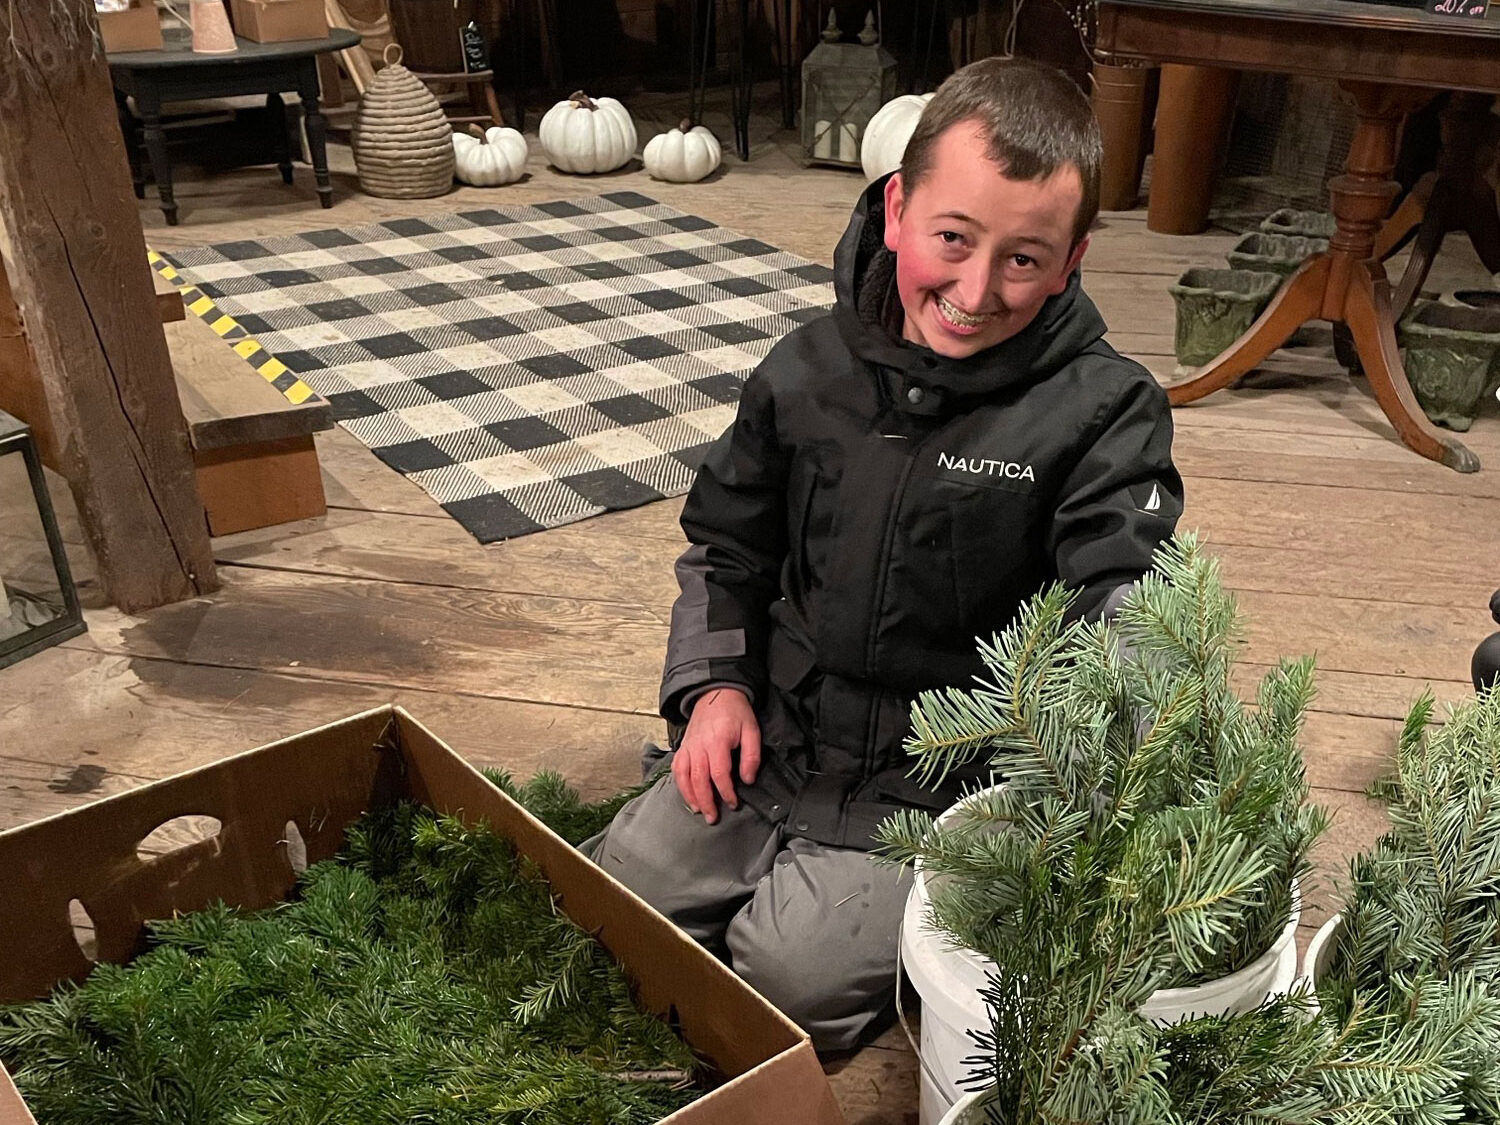 Cooper from Youth Transitional Services smiling while he in putting plants into boxes.